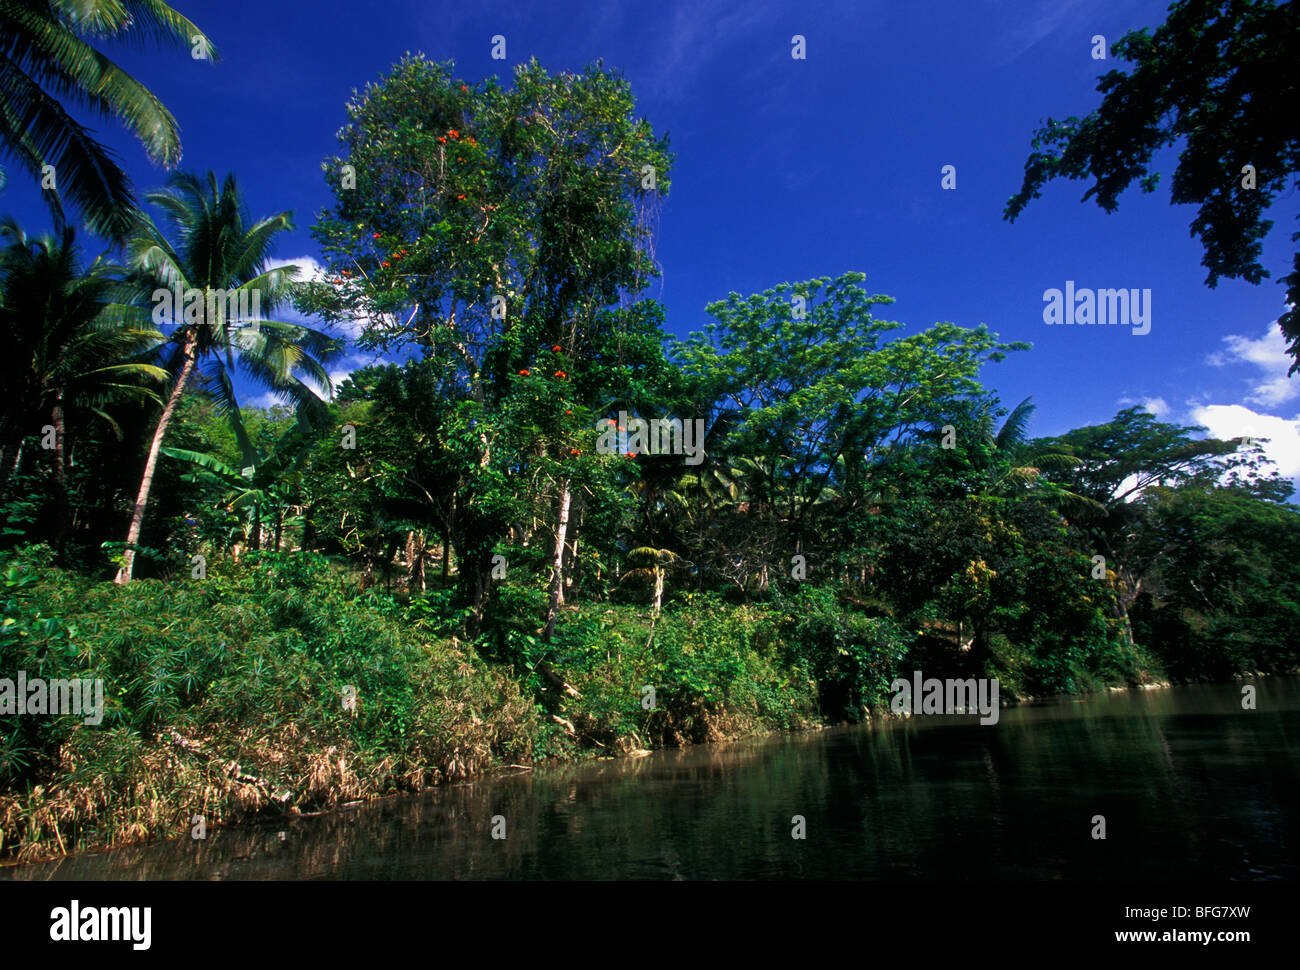 bamboo raft trip, The Great River, Great River, village of Lethe, Jamaica Stock Photo